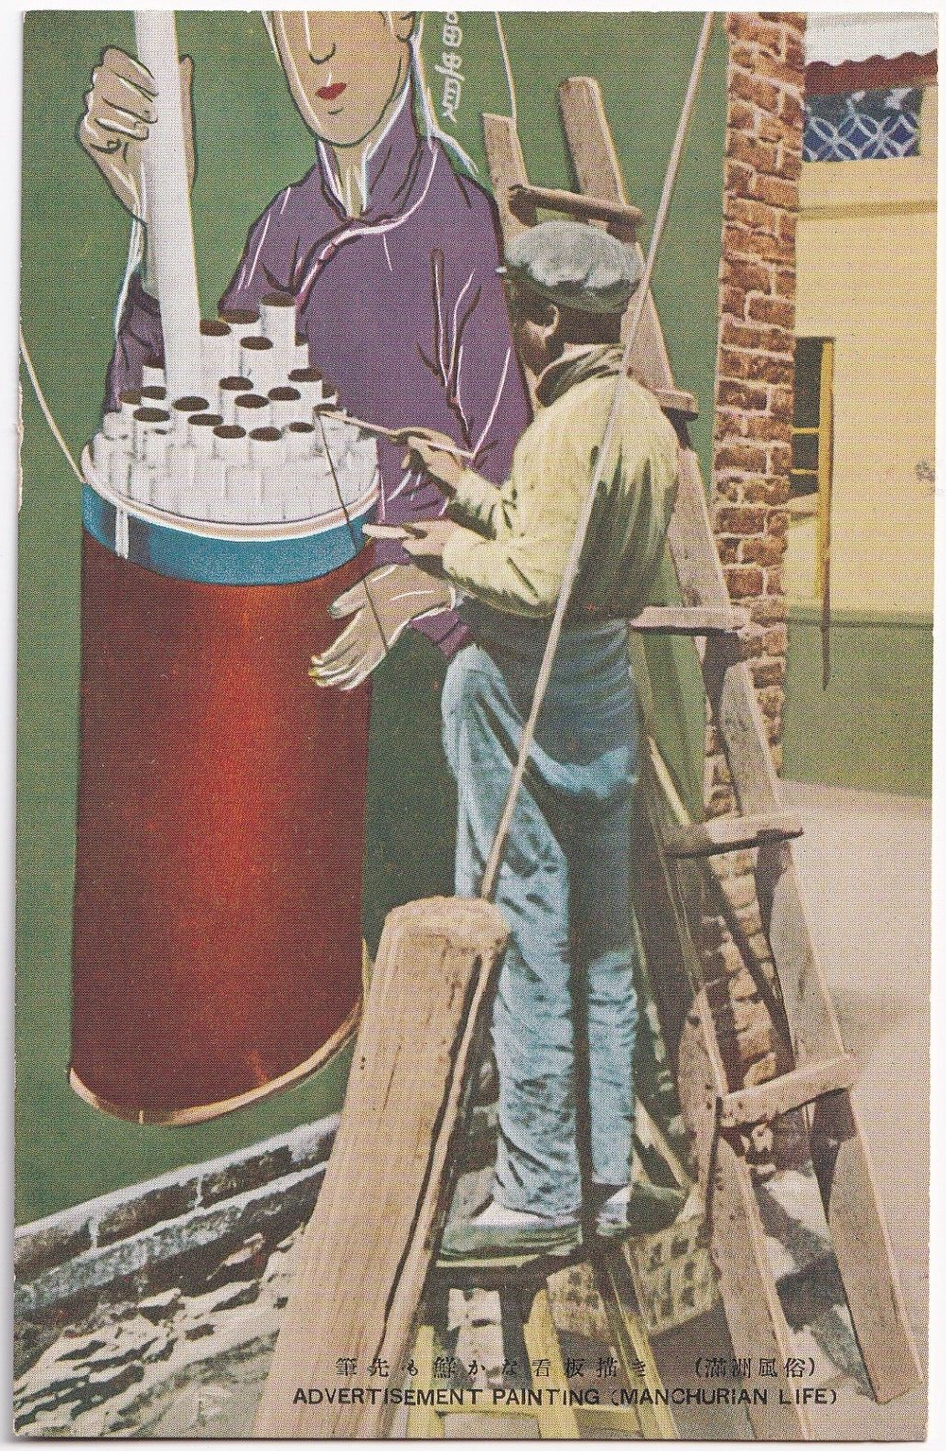 Late 1930s postcard from a series on Manchurian Life titled "Advertisement Painting". From the MOFBA collection.